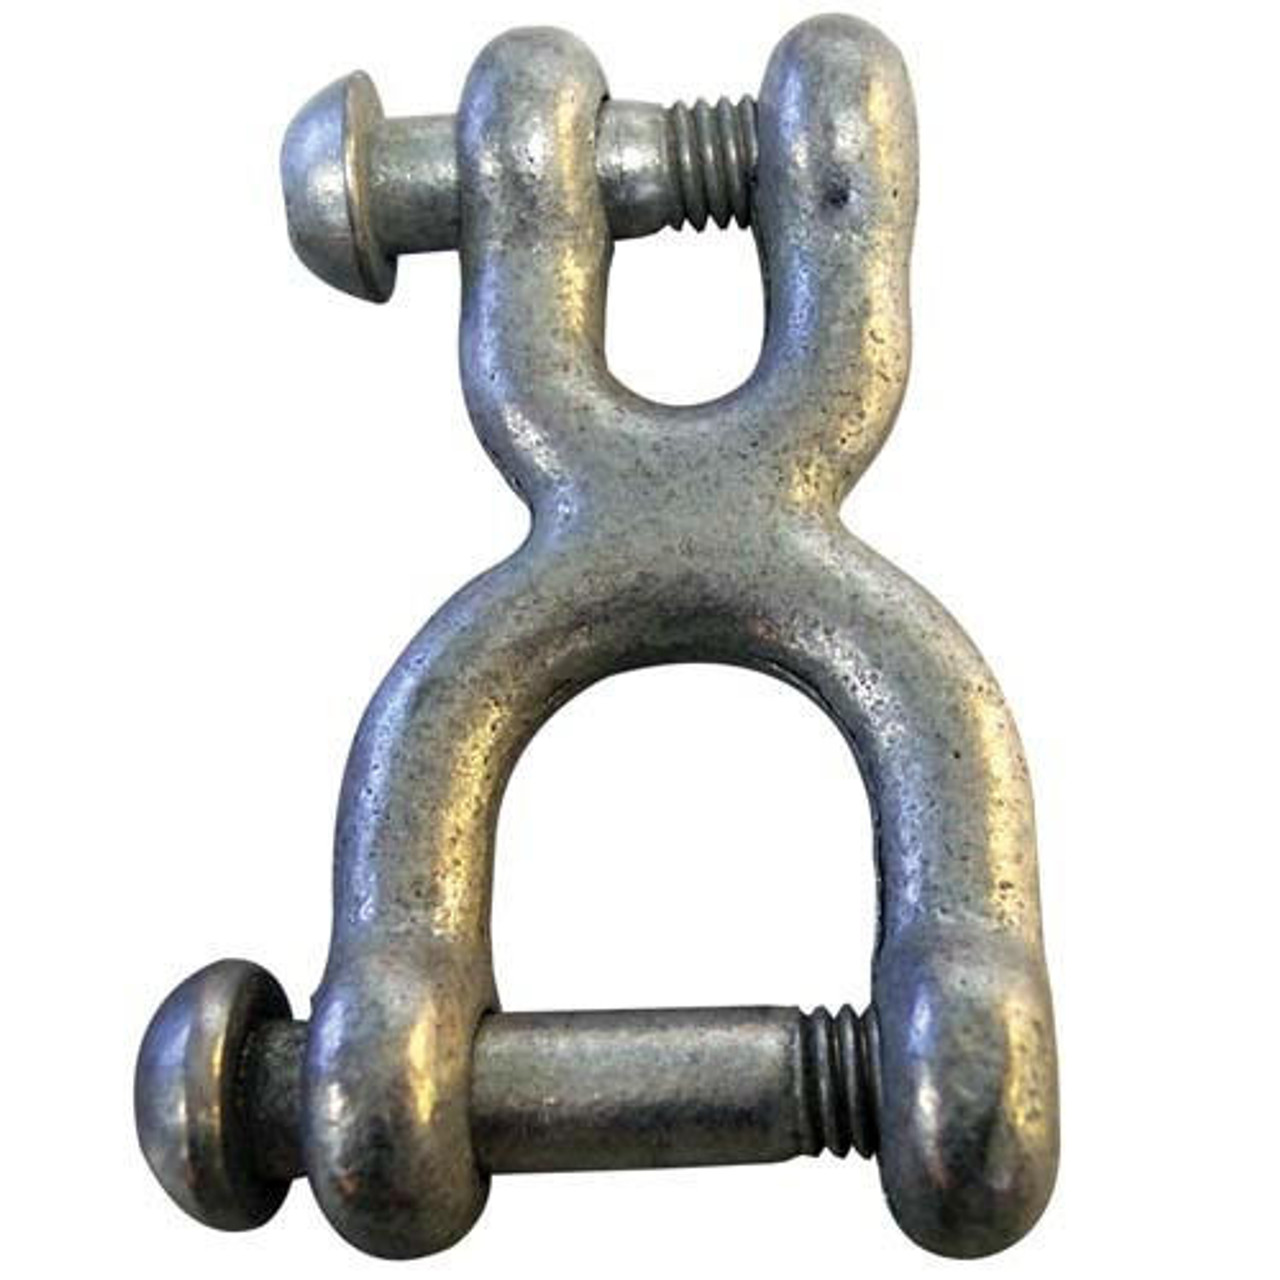 Jensen Replacement Safety Swing Shackle H-Hook 5/16w/T-Bolt, 3/8 Dia.  1-1/2 Bolt, Chain to Hanger